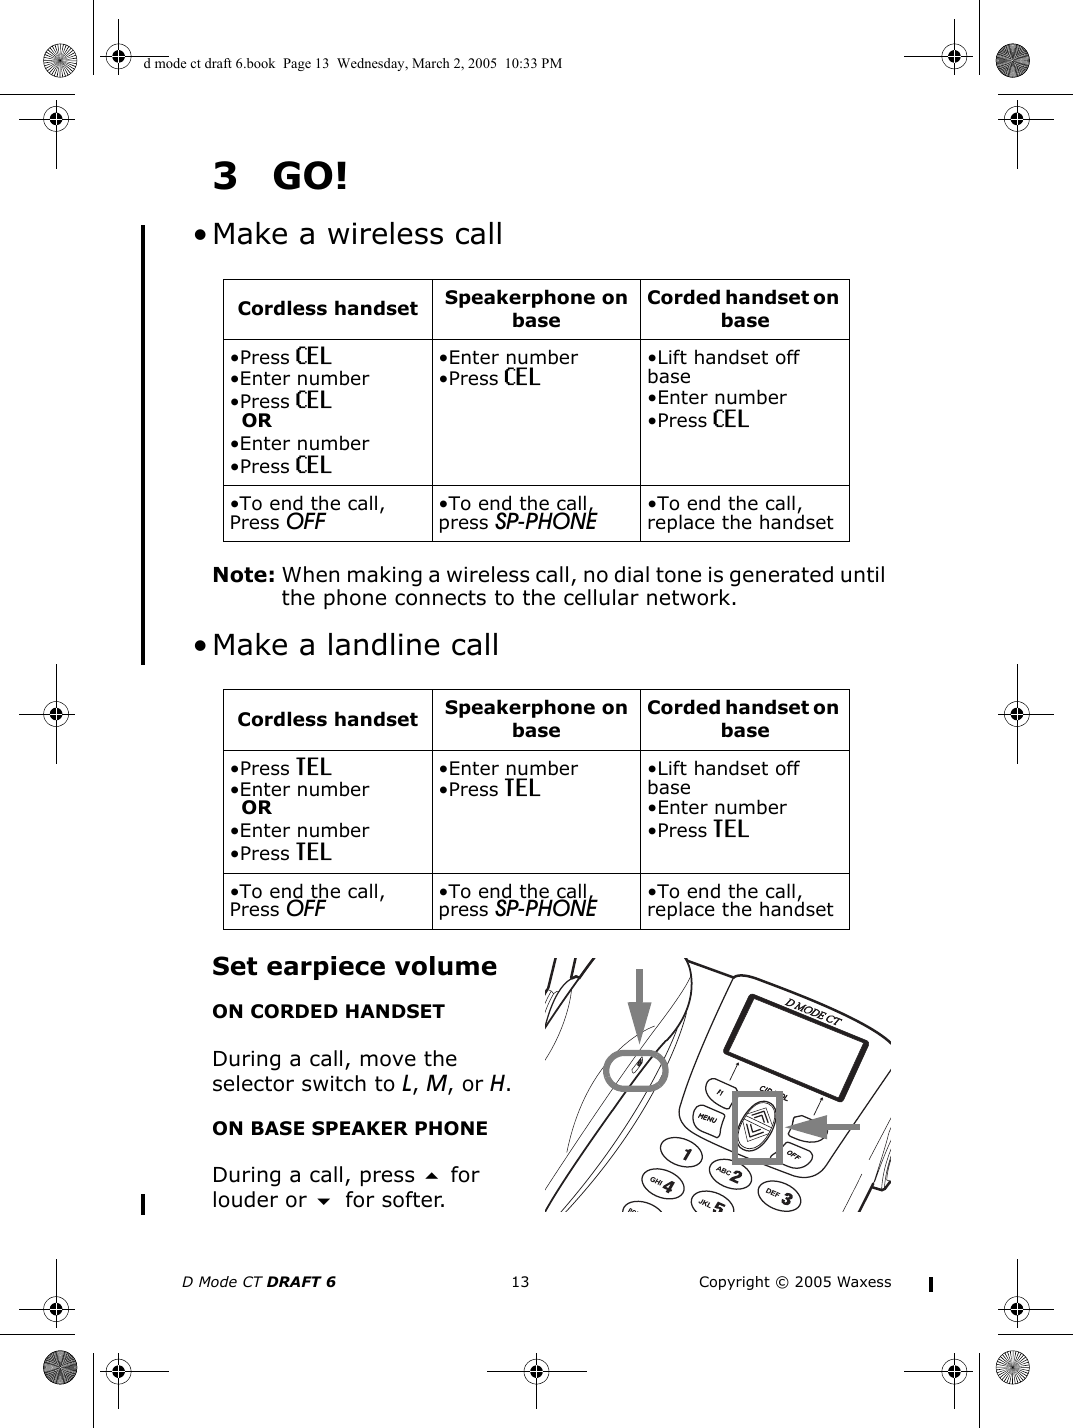 D Mode CT DRAFT 6 13 Copyright © 2005 Waxess3GO! • Make a wireless callNote: When making a wireless call, no dial tone is generated until the phone connects to the cellular network. • Make a landline callSet earpiece volumeON CORDED HANDSETDuring a call, move the selector switch to L, M, or H.ON BASE SPEAKER PHONEDuring a call, press  for louder or  for softer.Cordless handset Speakerphone on baseCorded handset on base•Press CEL•Enter number•Press CELOR•Enter number•Press CEL•Enter number•Press CEL •Lift handset off base•Enter number•Press CEL•To end the call, Press OFF •To end the call, press SP-PHONE •To end the call, replace the handsetCordless handset Speakerphone on baseCorded handset on base•Press TEL•Enter numberOR•Enter number•Press TEL•Enter number•Press TEL •Lift handset off base•Enter number•Press TEL•To end the call, Press OFF •To end the call, press SP-PHONE •To end the call, replace the handsetd mode ct draft 6.book  Page 13  Wednesday, March 2, 2005  10:33 PM